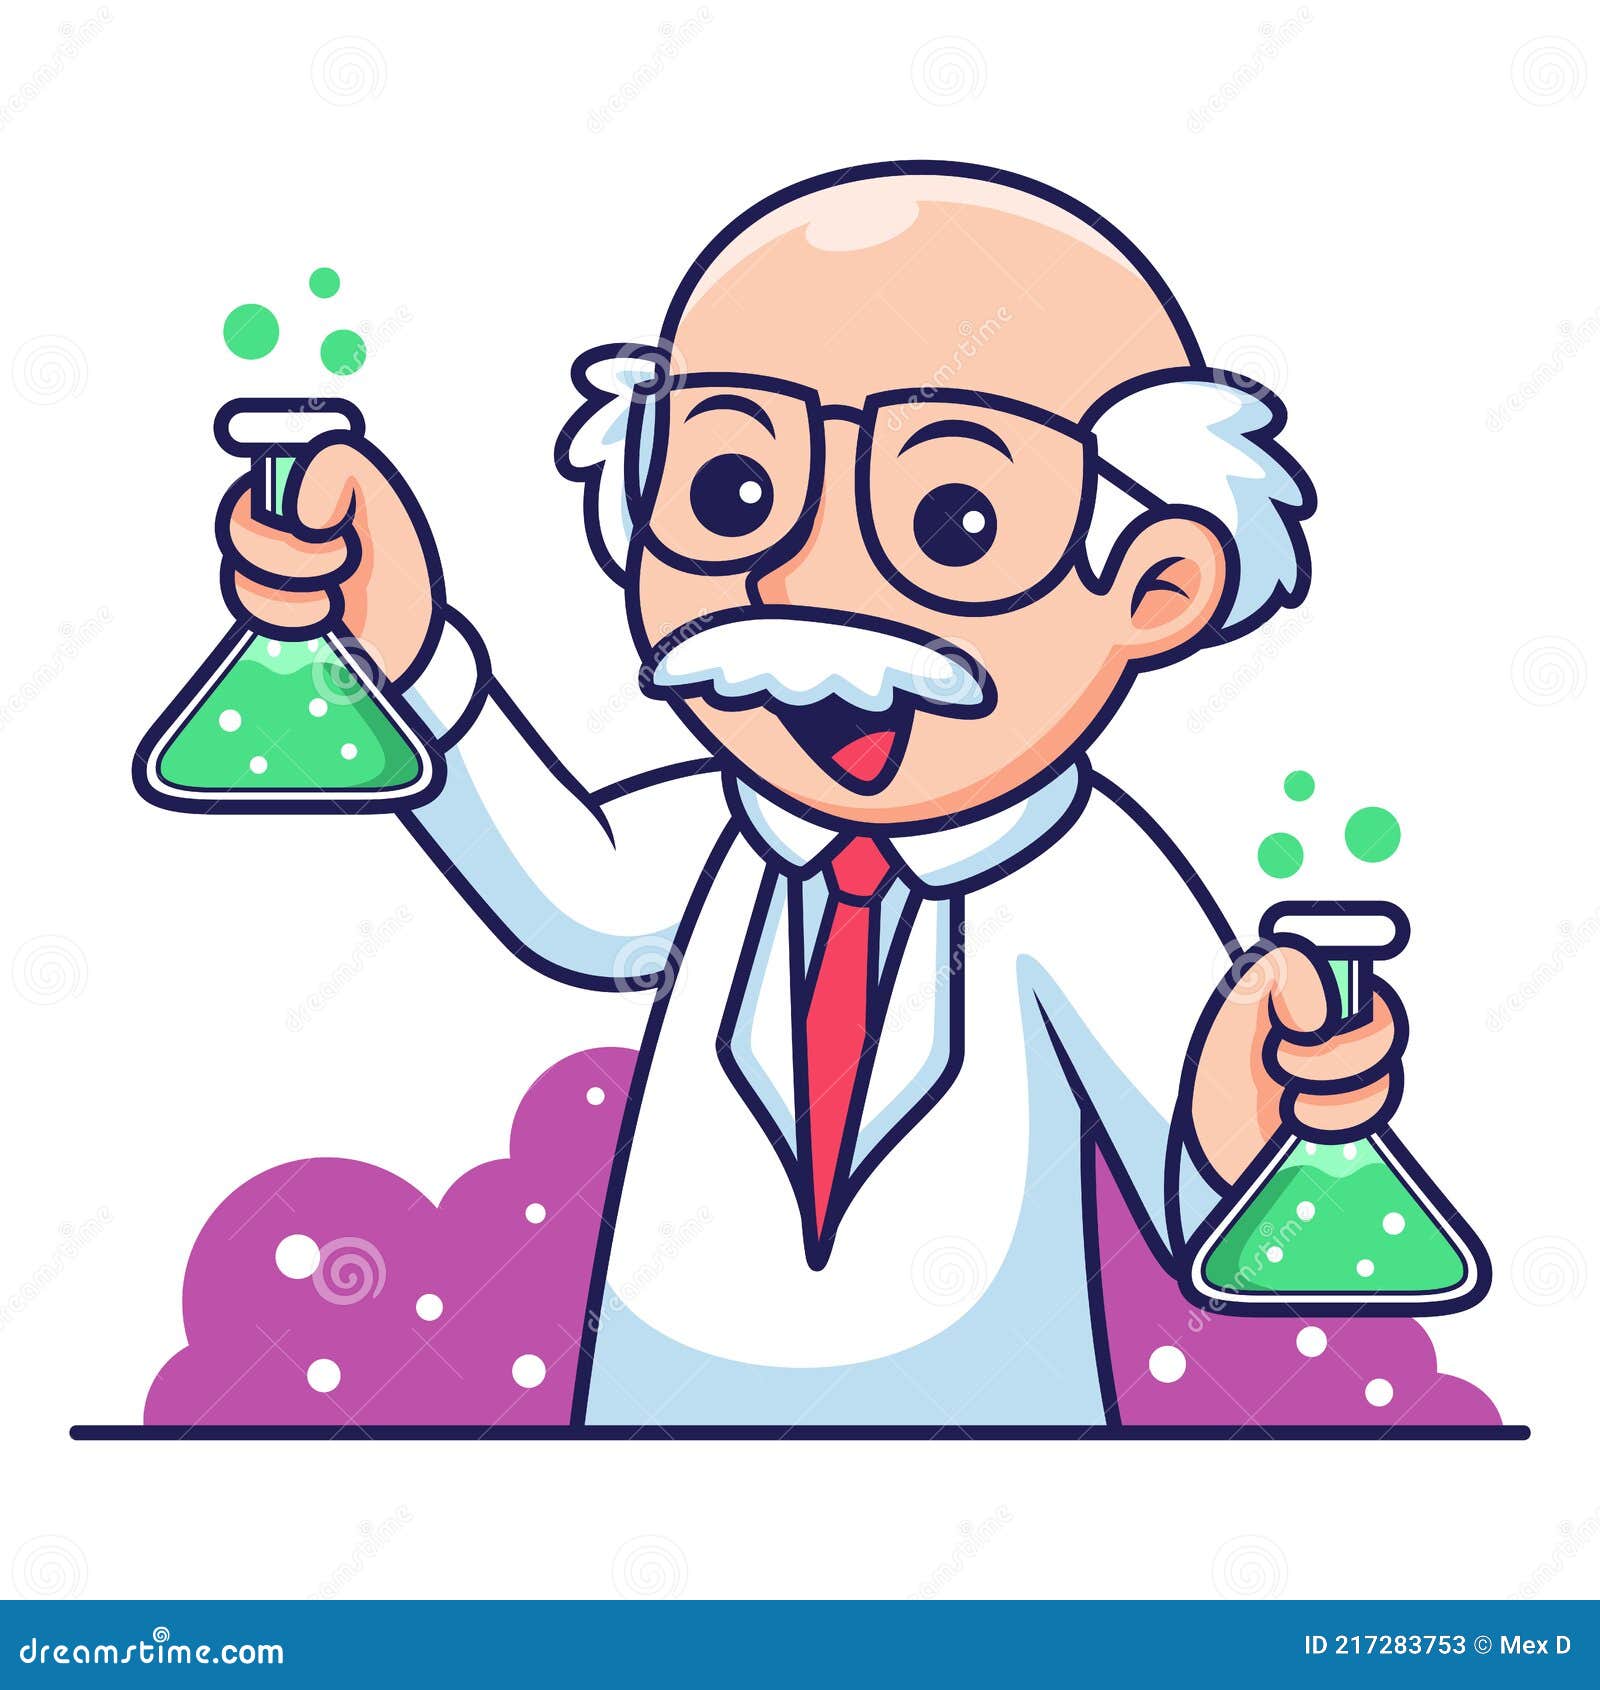 Cute Professor Cartoon with New Invention. Vector Icon Illustration,  Isolated on Premium Vector Stock Vector - Illustration of avatar, smart:  217283753